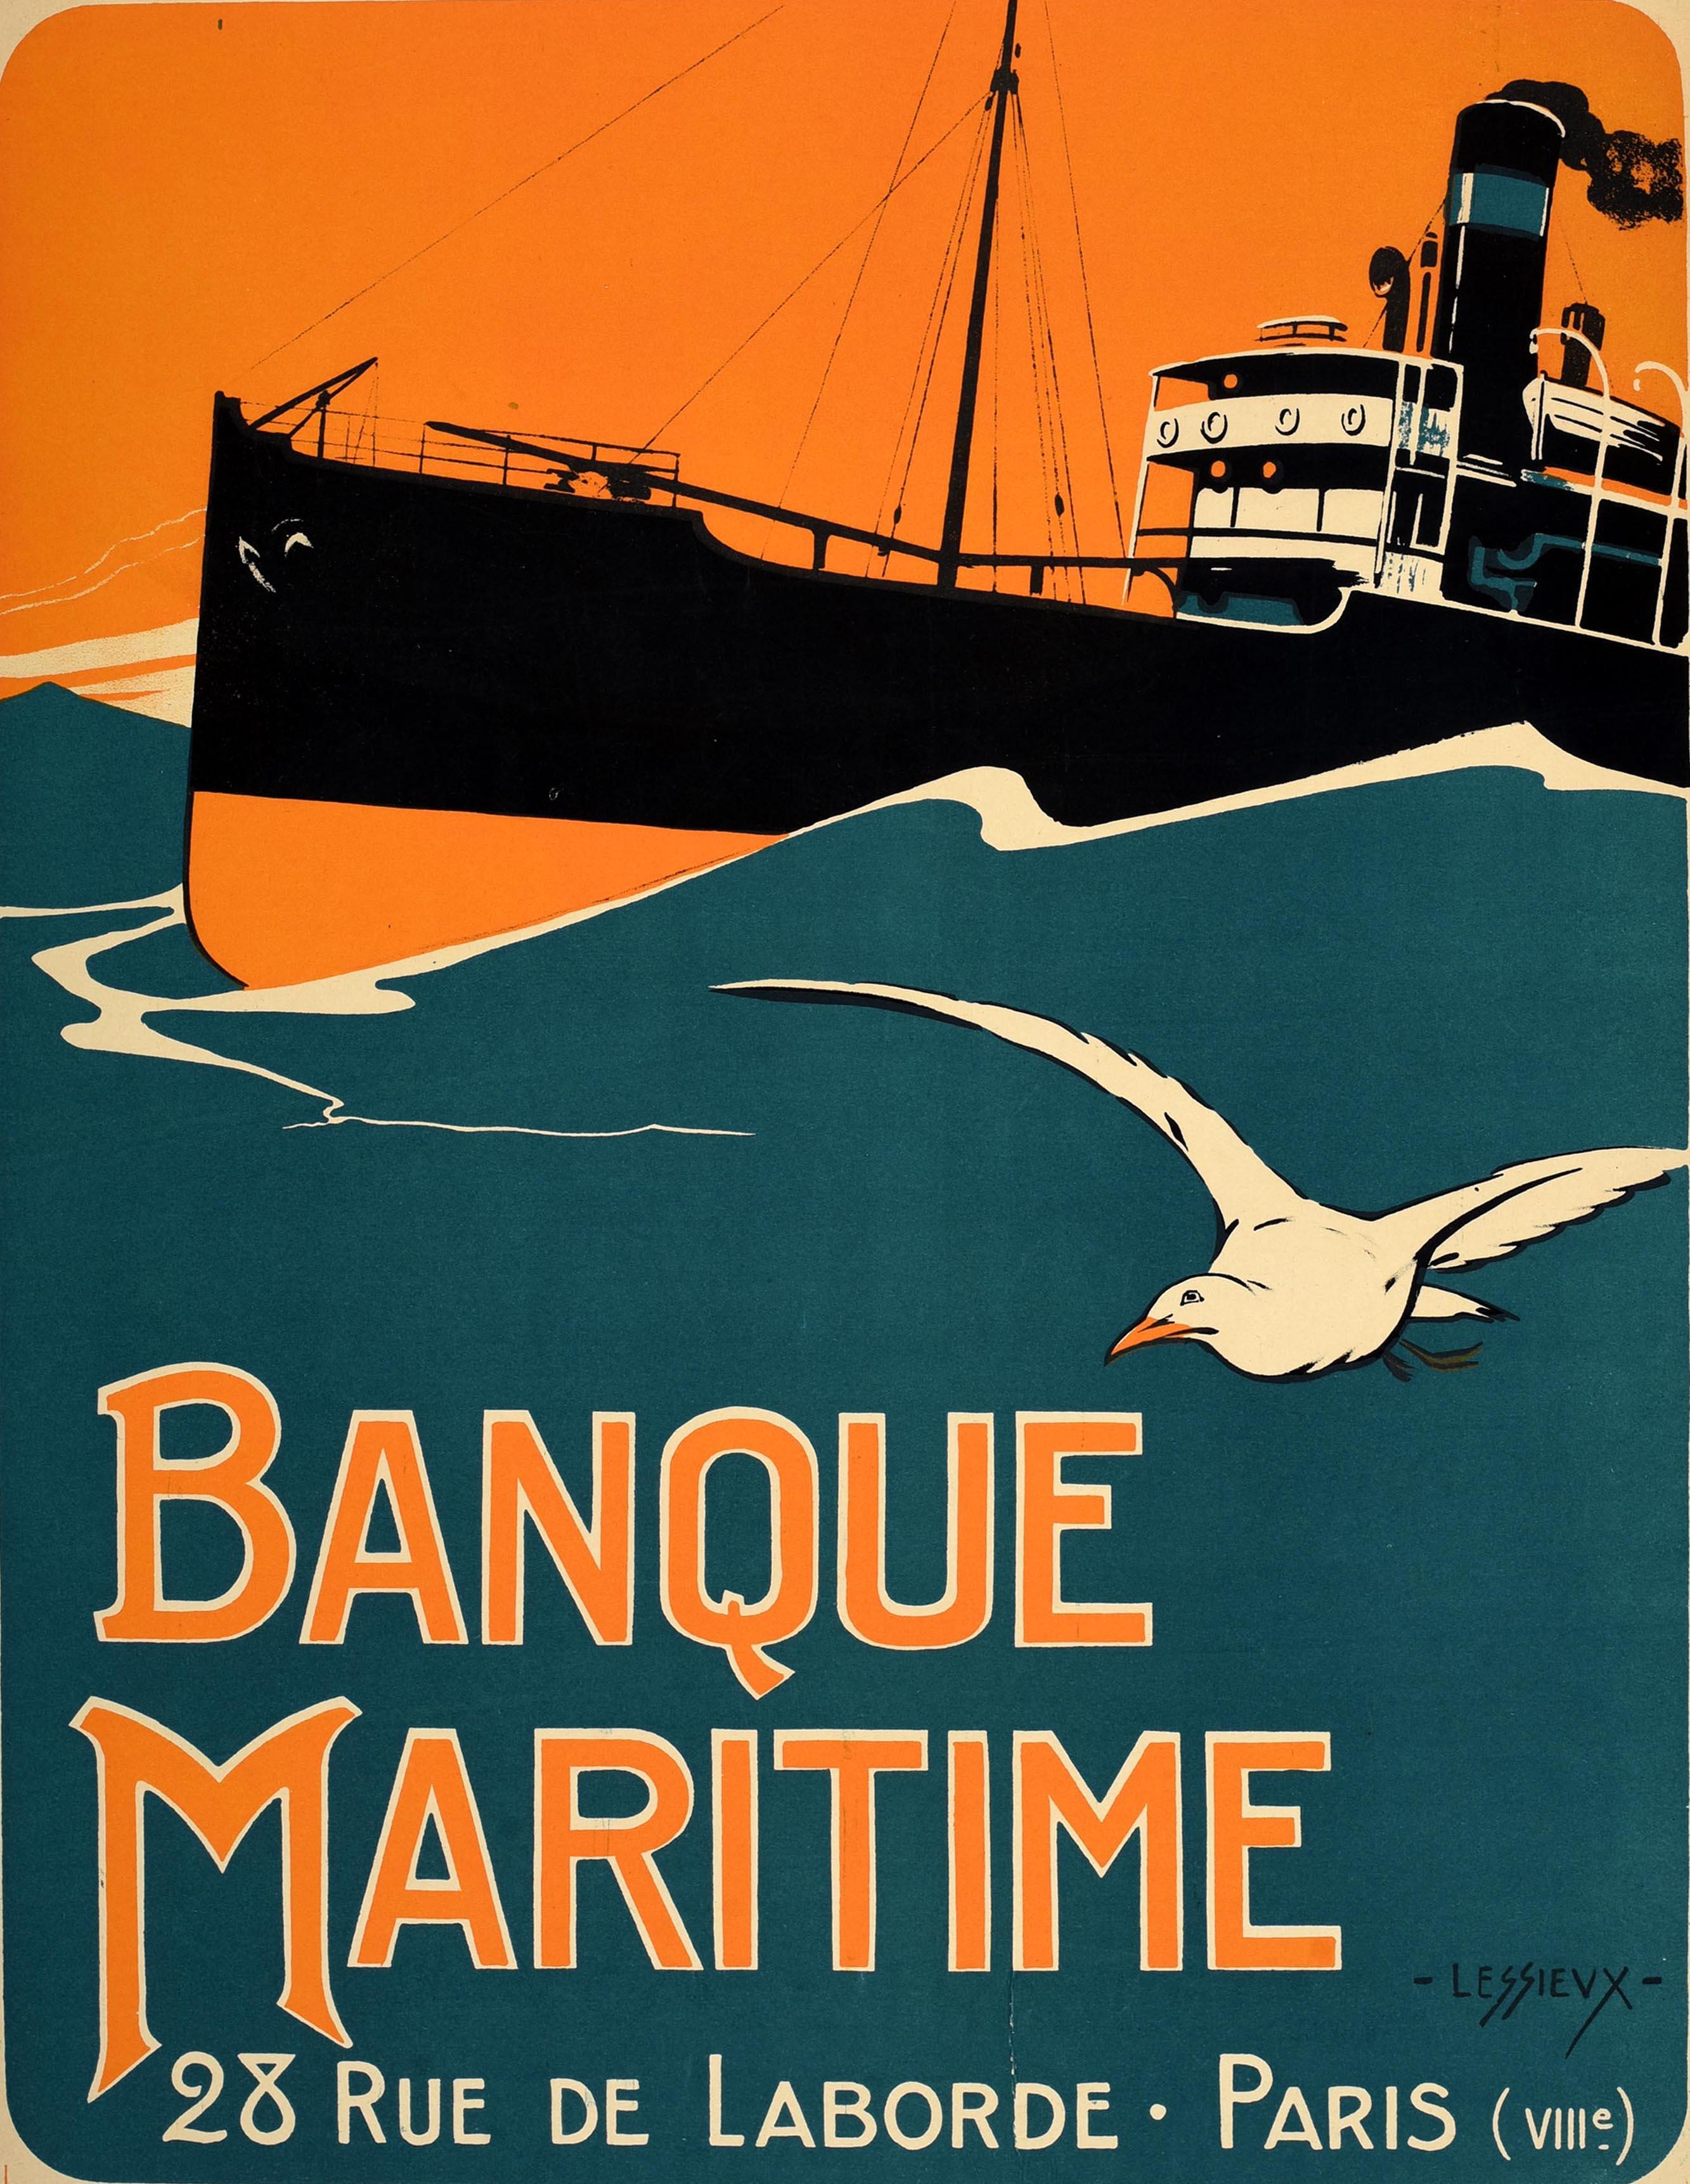 Original antique French poster - Emprunt National 1920 Banque Maritime 28 Rue de Laborde Paris / National Loan 1920 Maritime Bank - featuring a design by Ernest Louis Lessieux (1848-1925) depicting a steam ship sailing at sea through blue waves with